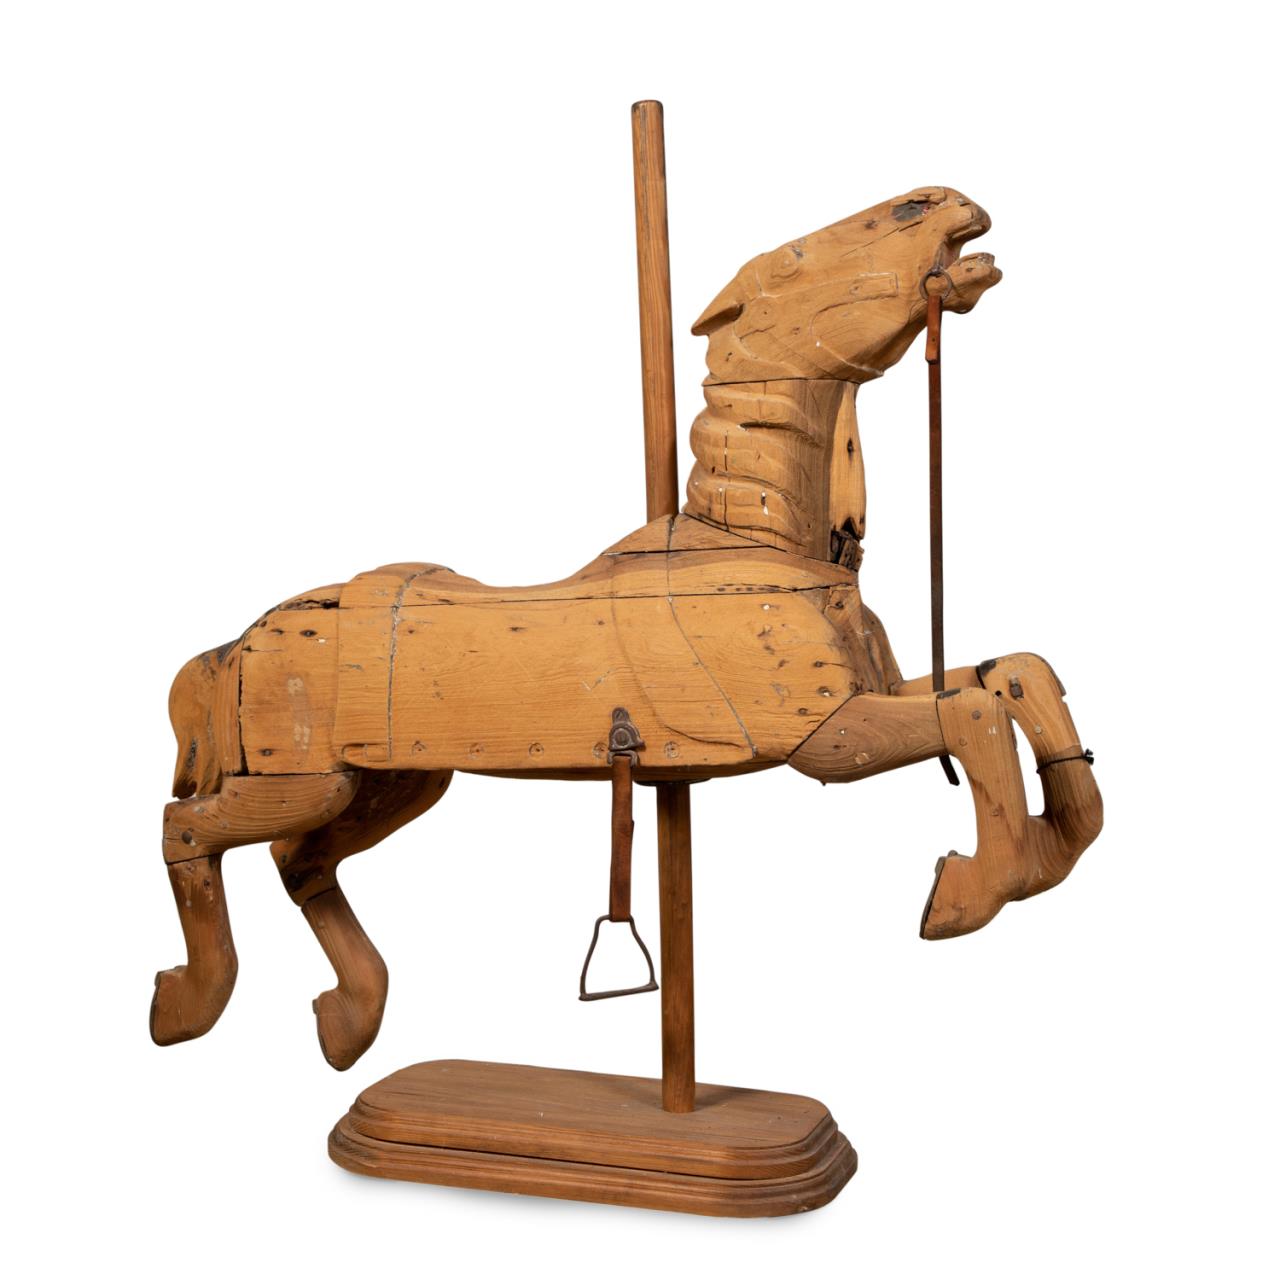 DISTRESSED CARVED WOODEN CAROUSEL 2889db